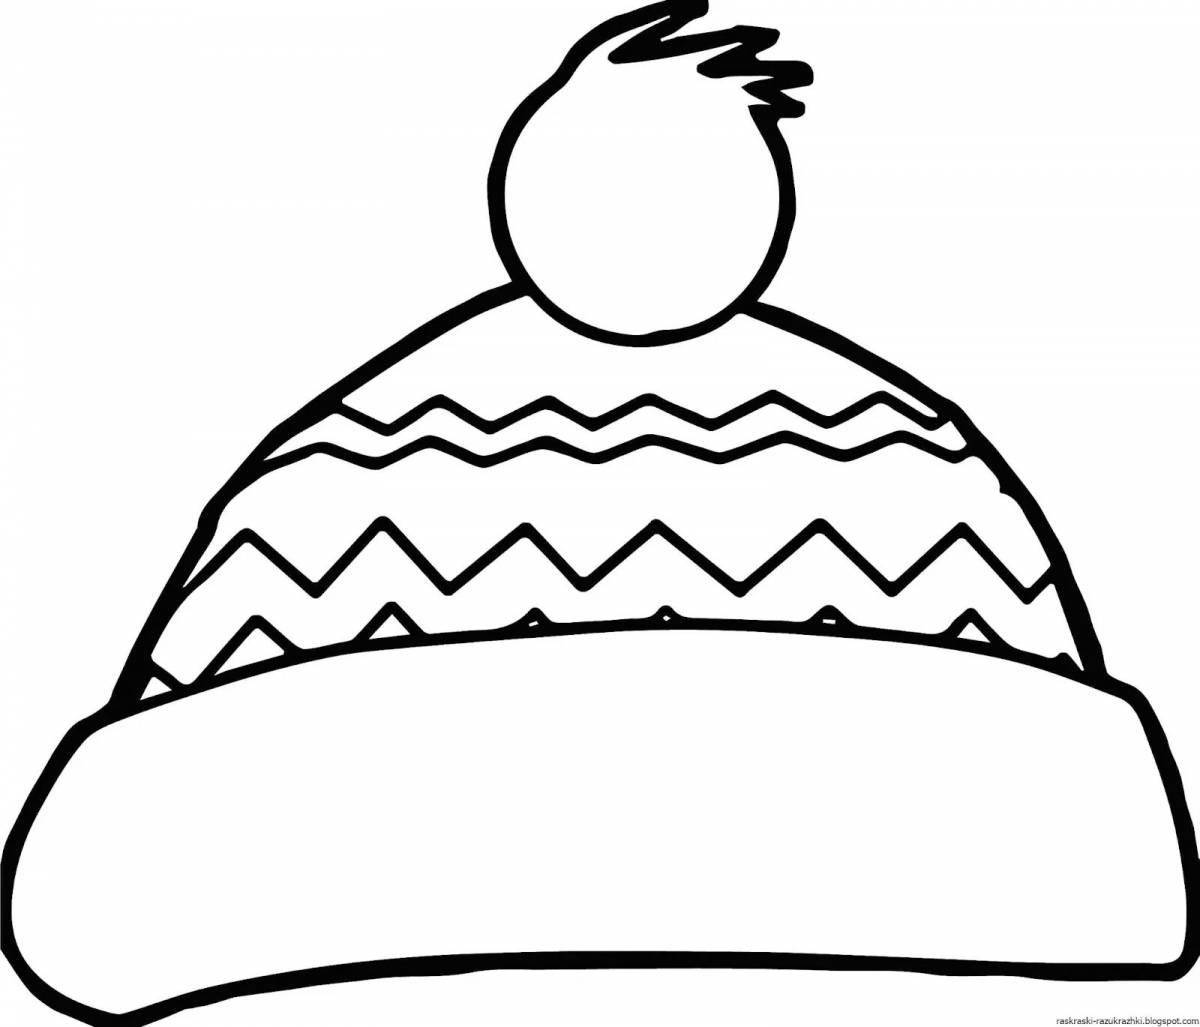 Hat picture for kids #21